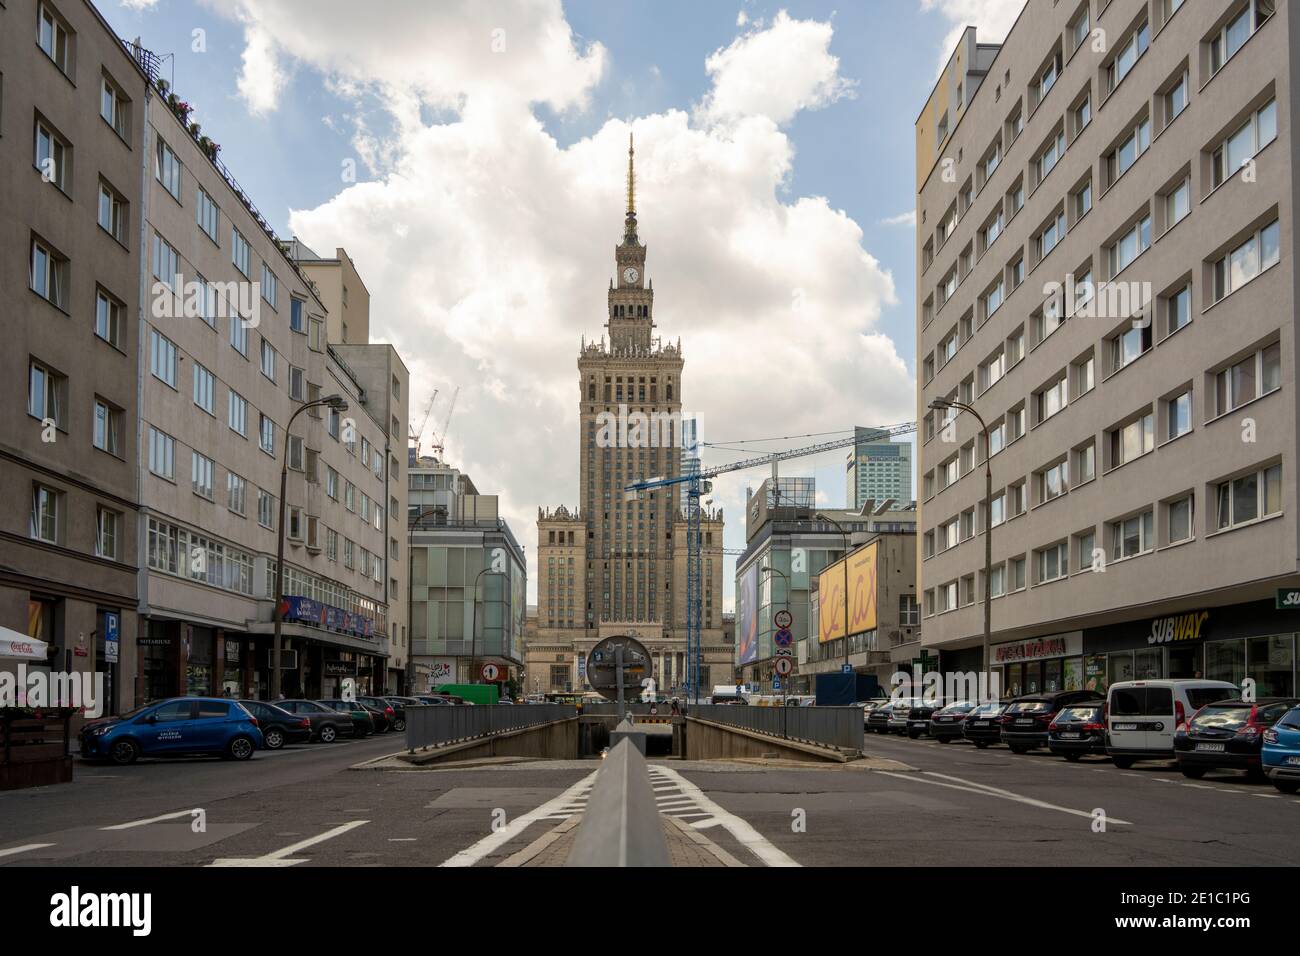 Warsaw, Poland - January 14, 2019: Street leading to Palace of culture and science Stock Photo